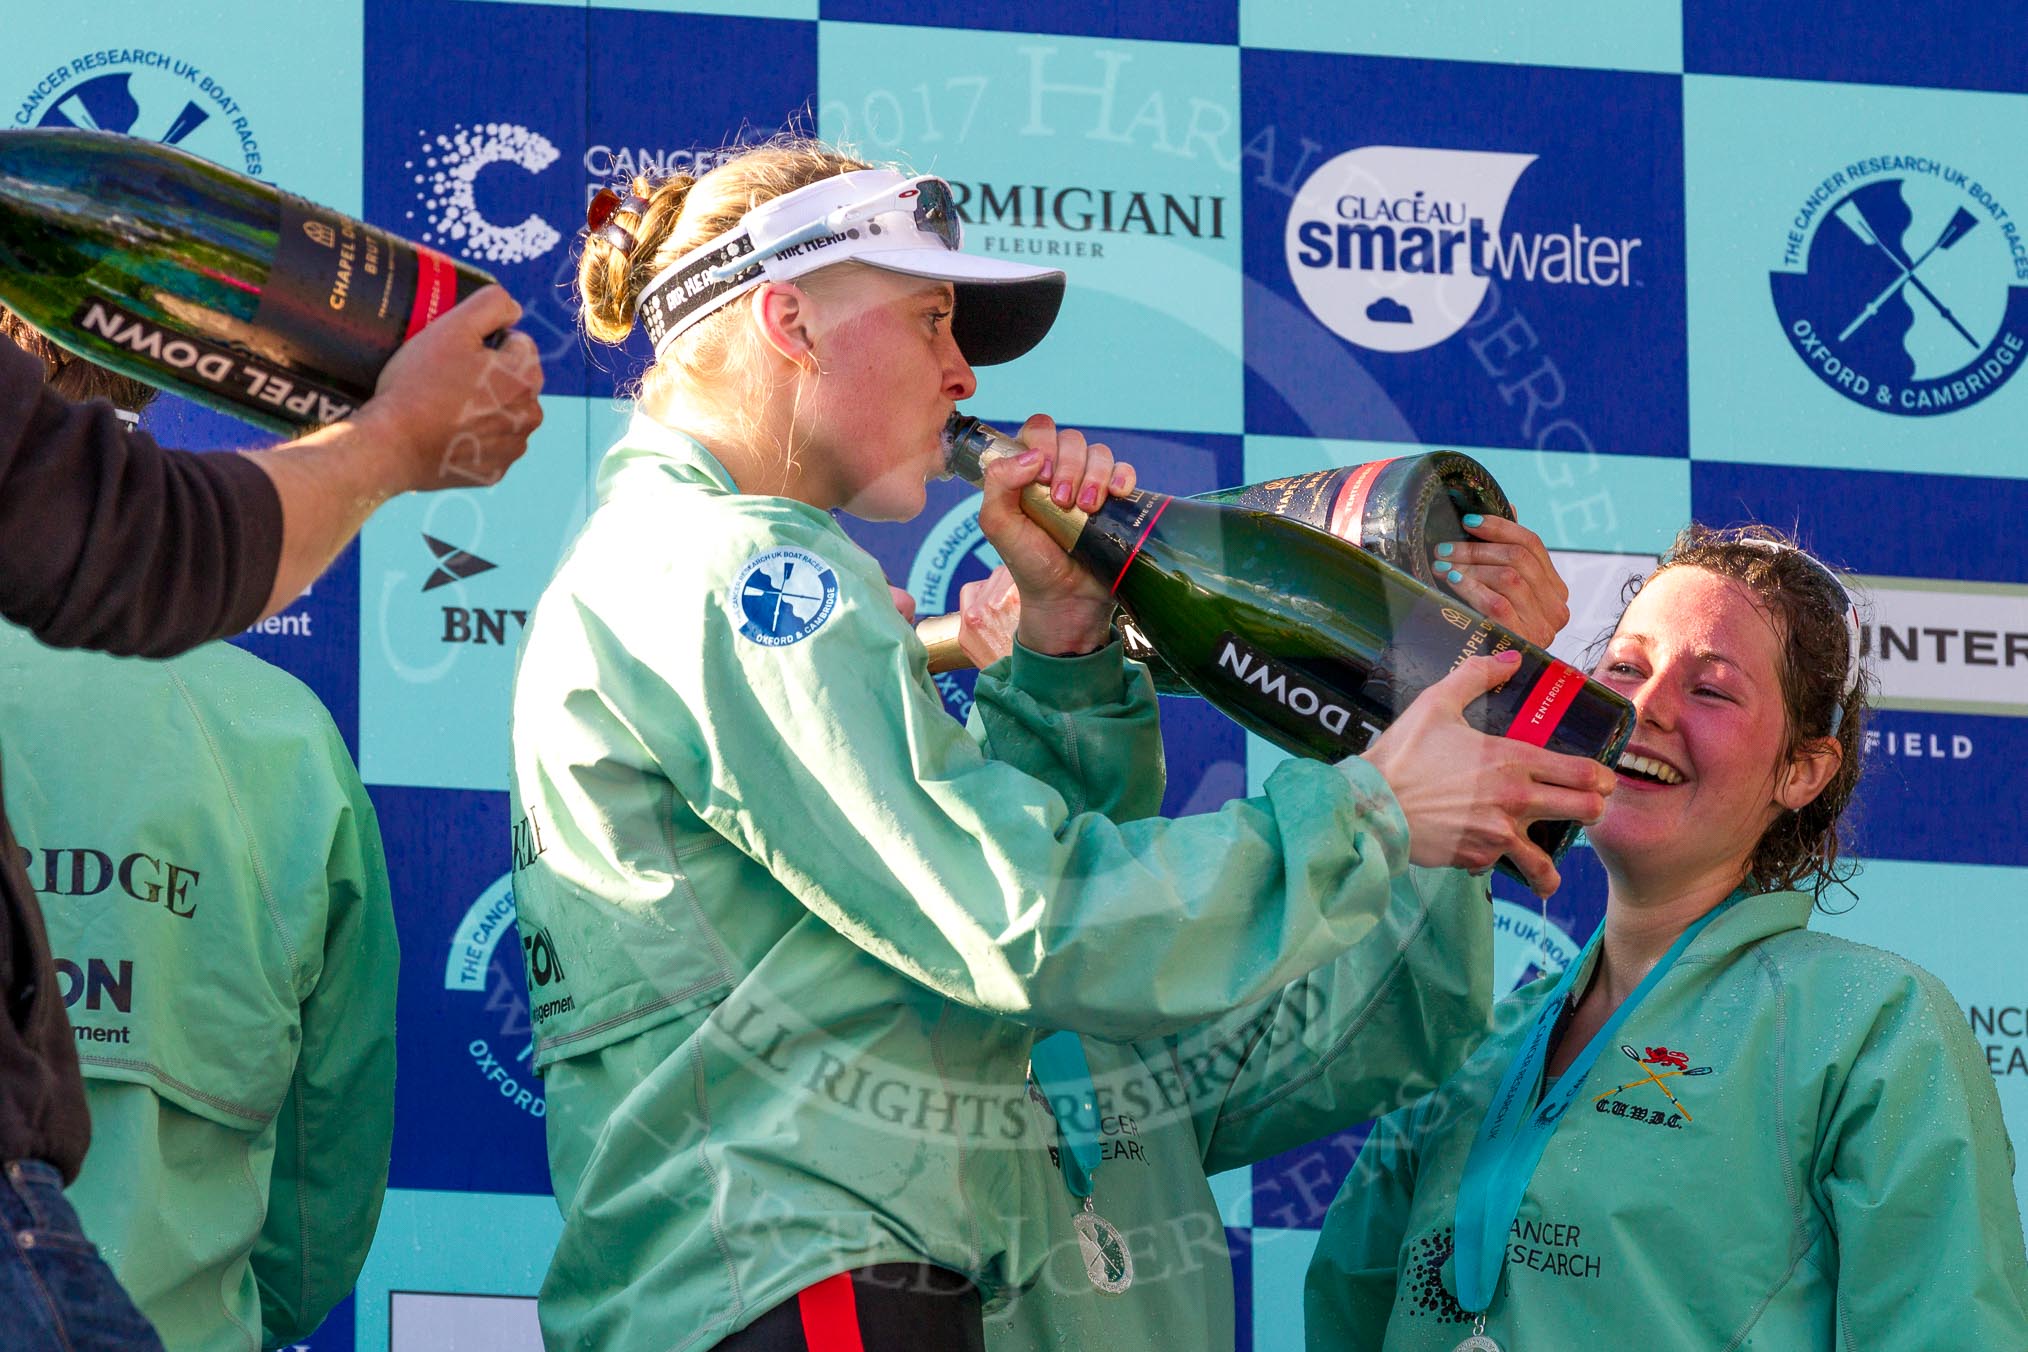 The Boat Race season 2017 -  The Cancer Research Women's Boat Race: CUWBC working hard to empty the bottles of Champagne at the price giving.
River Thames between Putney Bridge and Mortlake,
London SW15,

United Kingdom,
on 02 April 2017 at 17:13, image #280